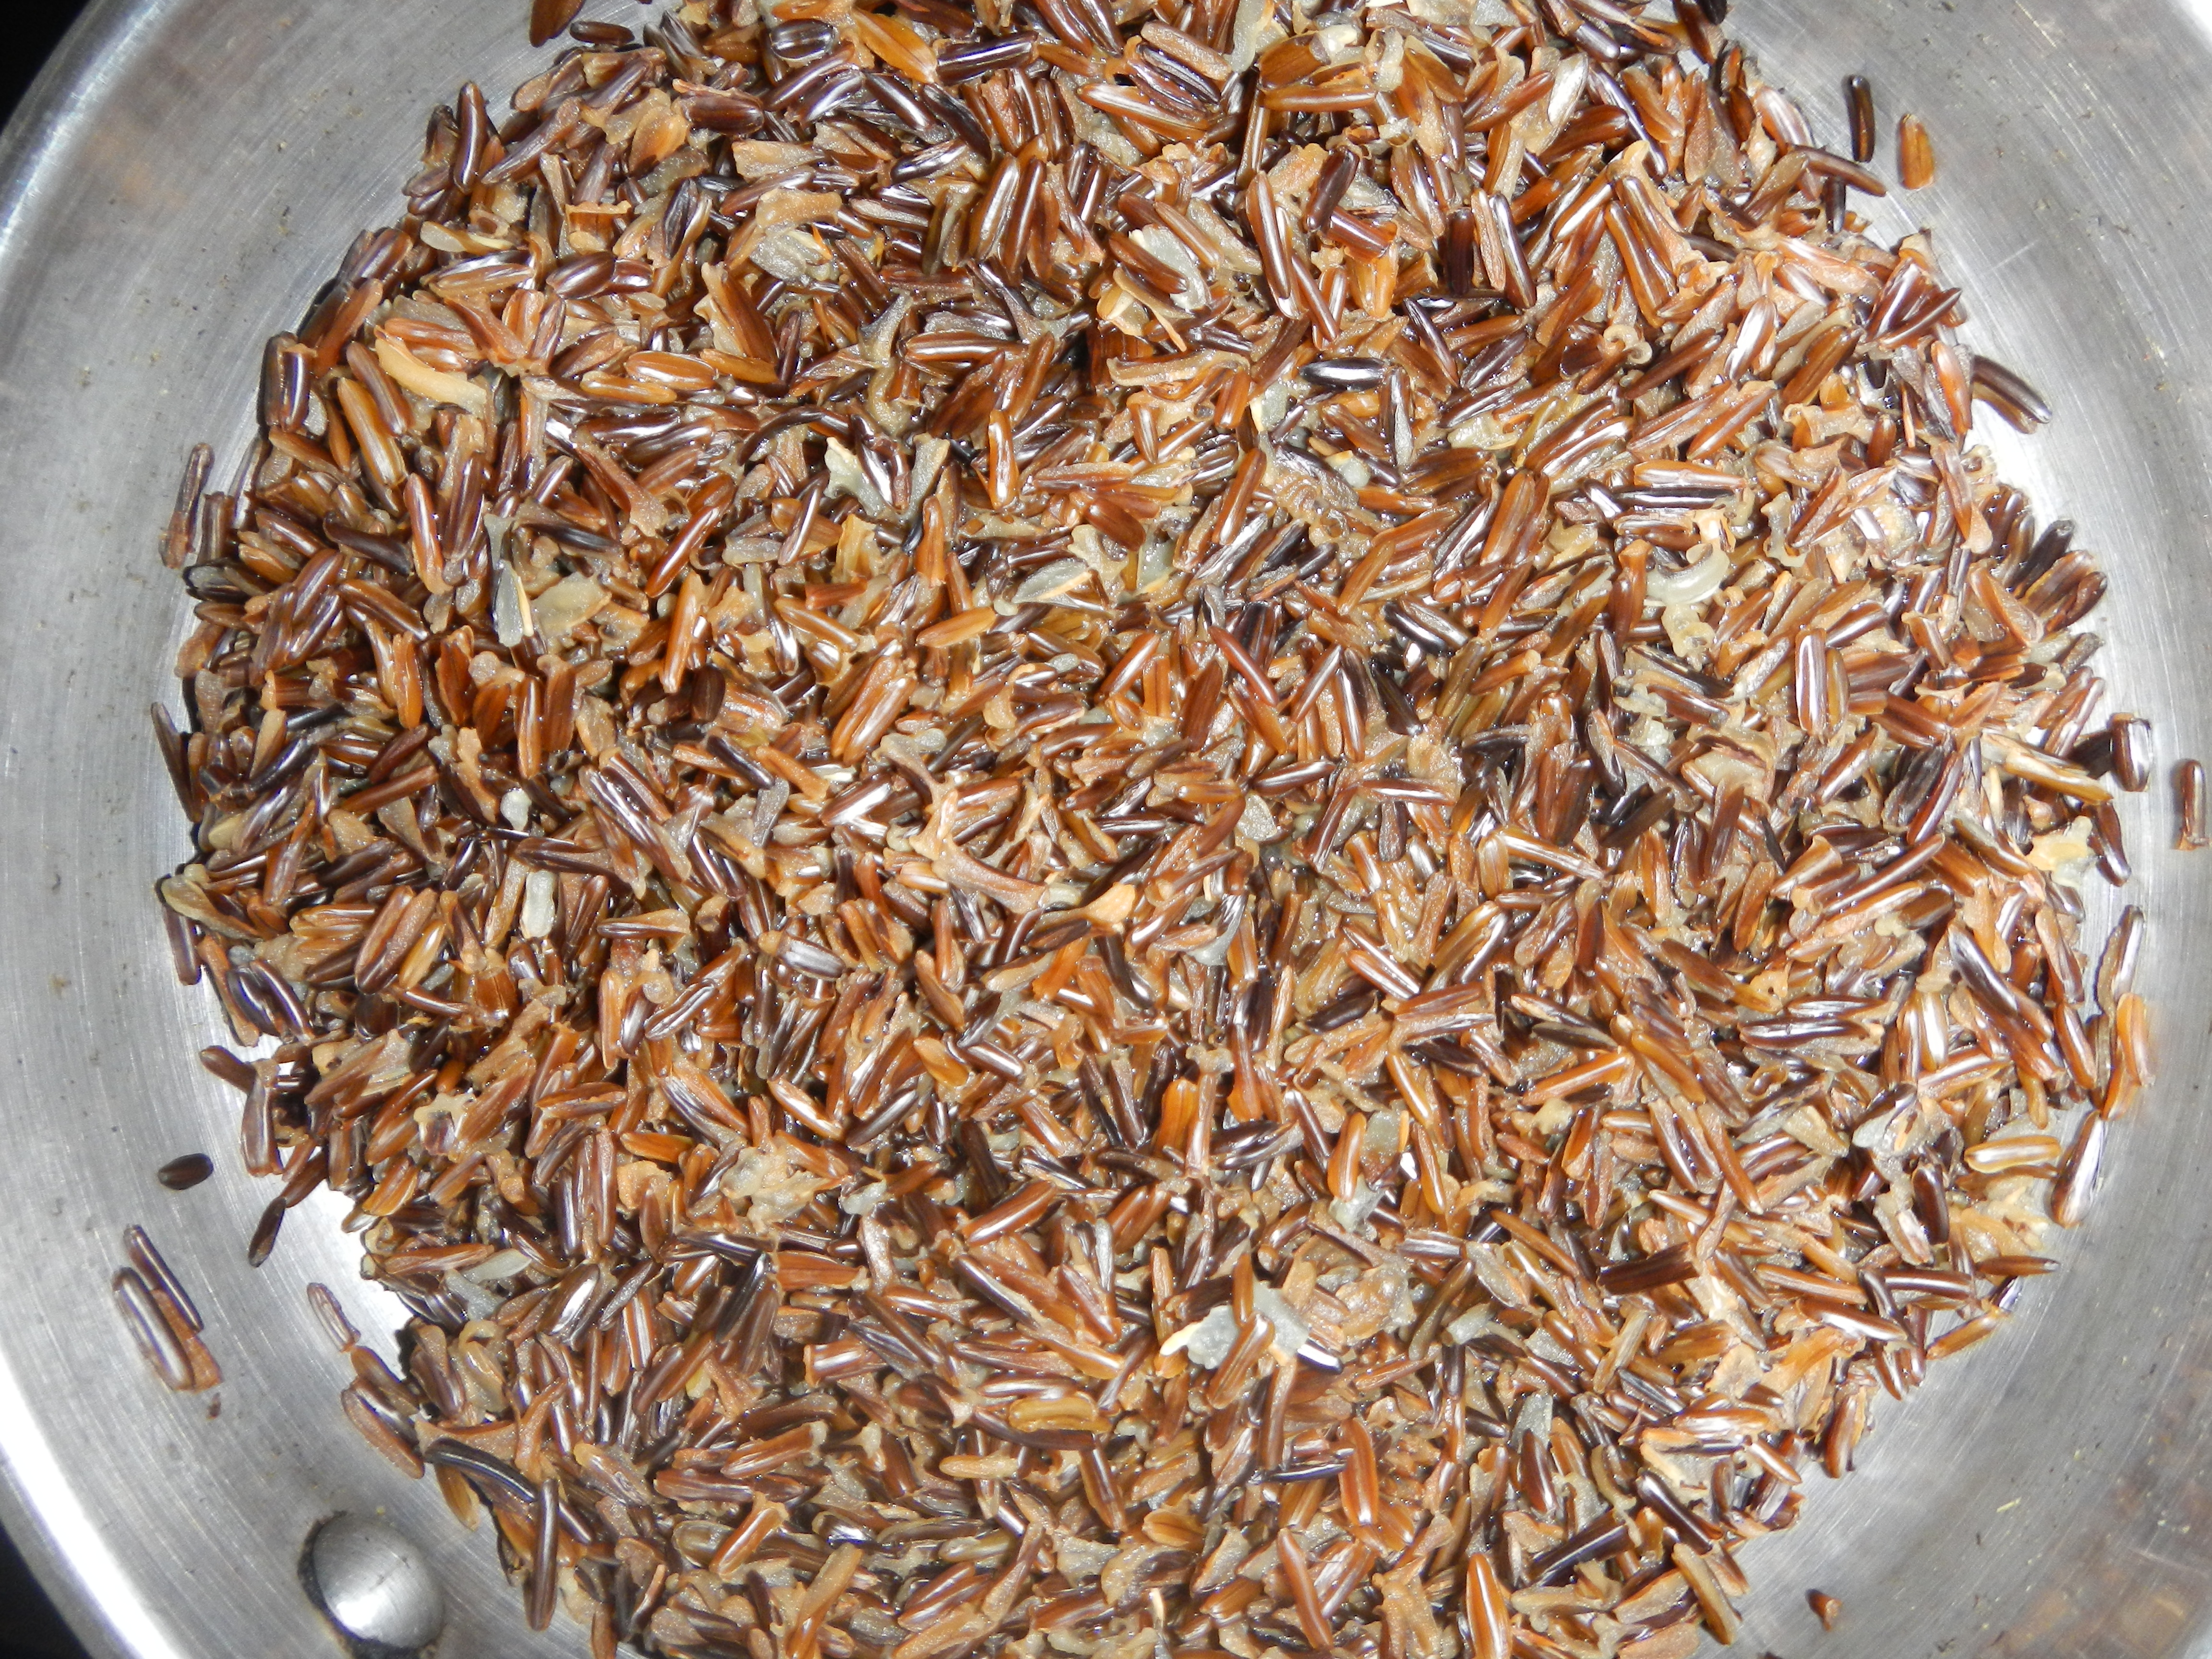 Image shows cooked wild rice in a pan